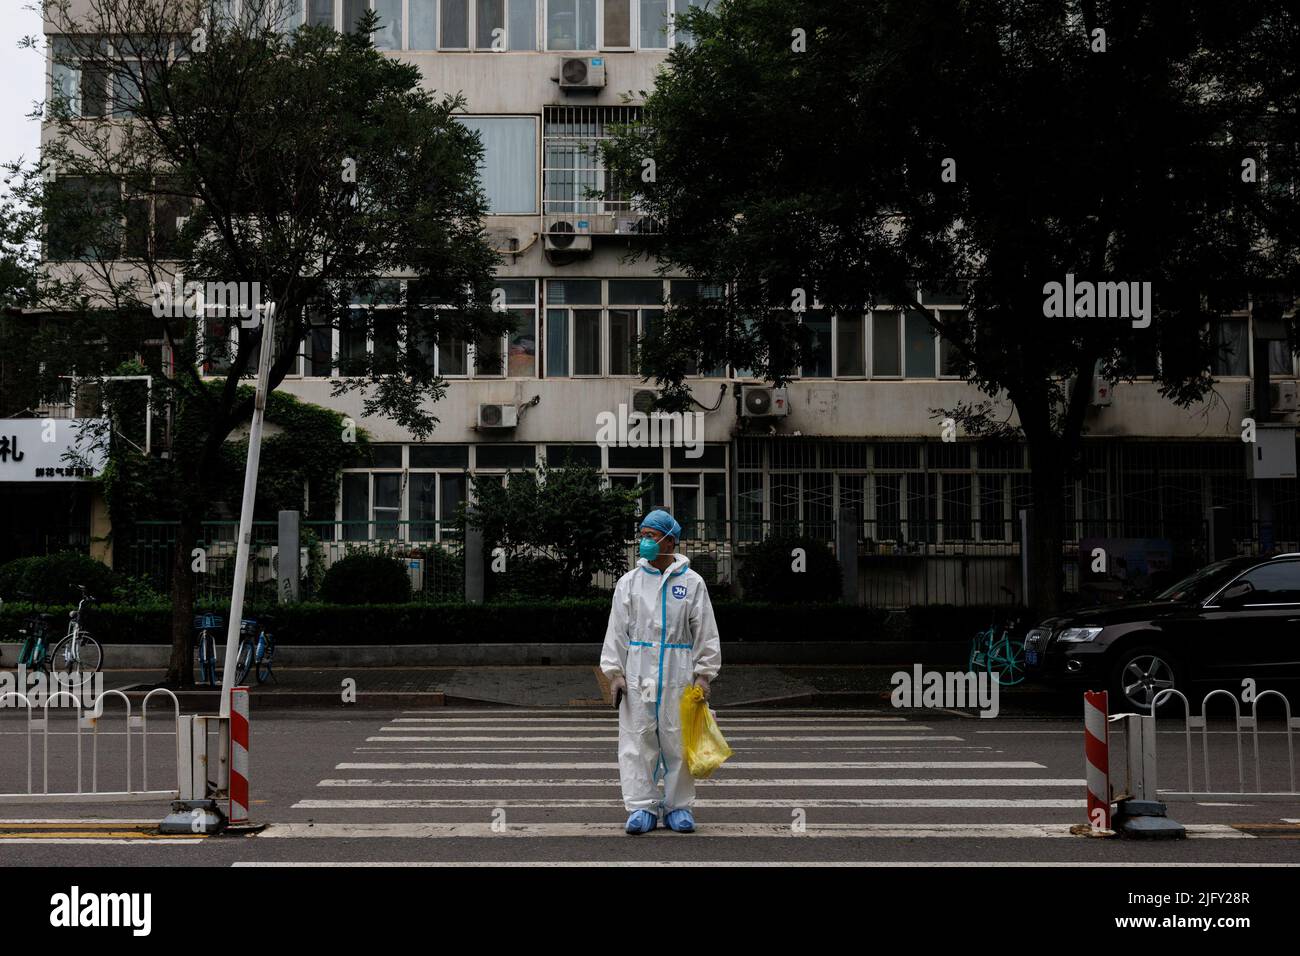 Medical worker in a protective suit crosses a street following a coronavirus disease (COVID-19) outbreak in Beijing, China, July 6, 2022. REUTERS/Thomas Peter Stock Photo